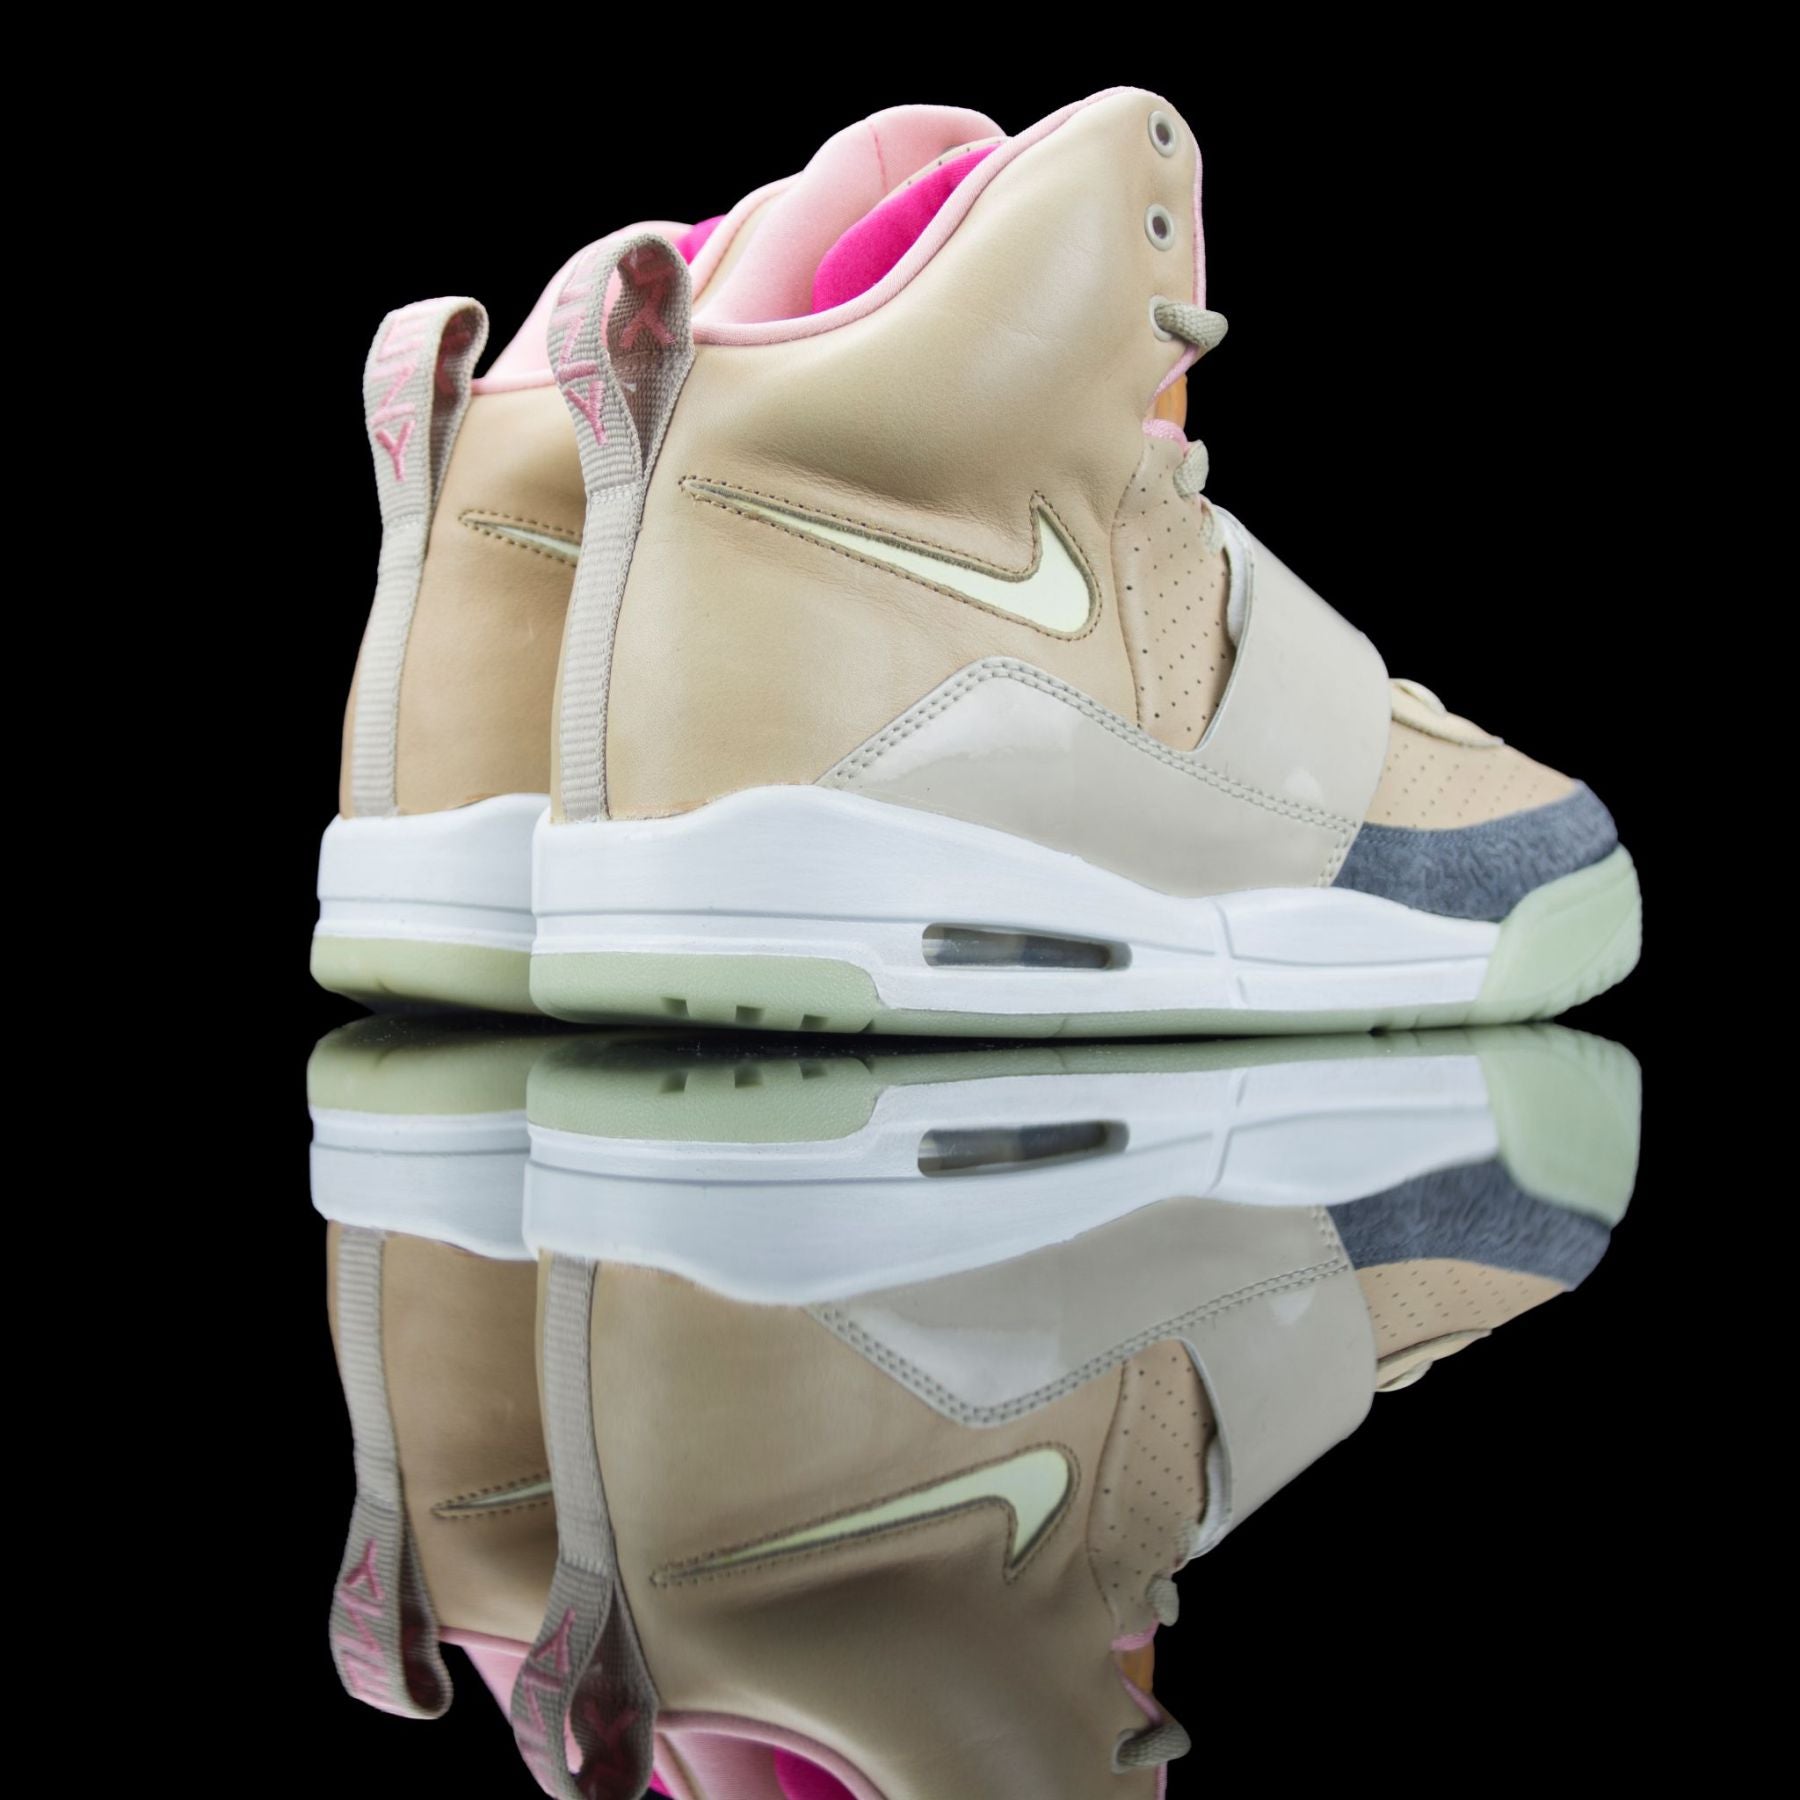 Nike-Air Yeezy 1-Product code: 366164-111 Colour: Net/Net Year of release: 2009-fabriqe.com